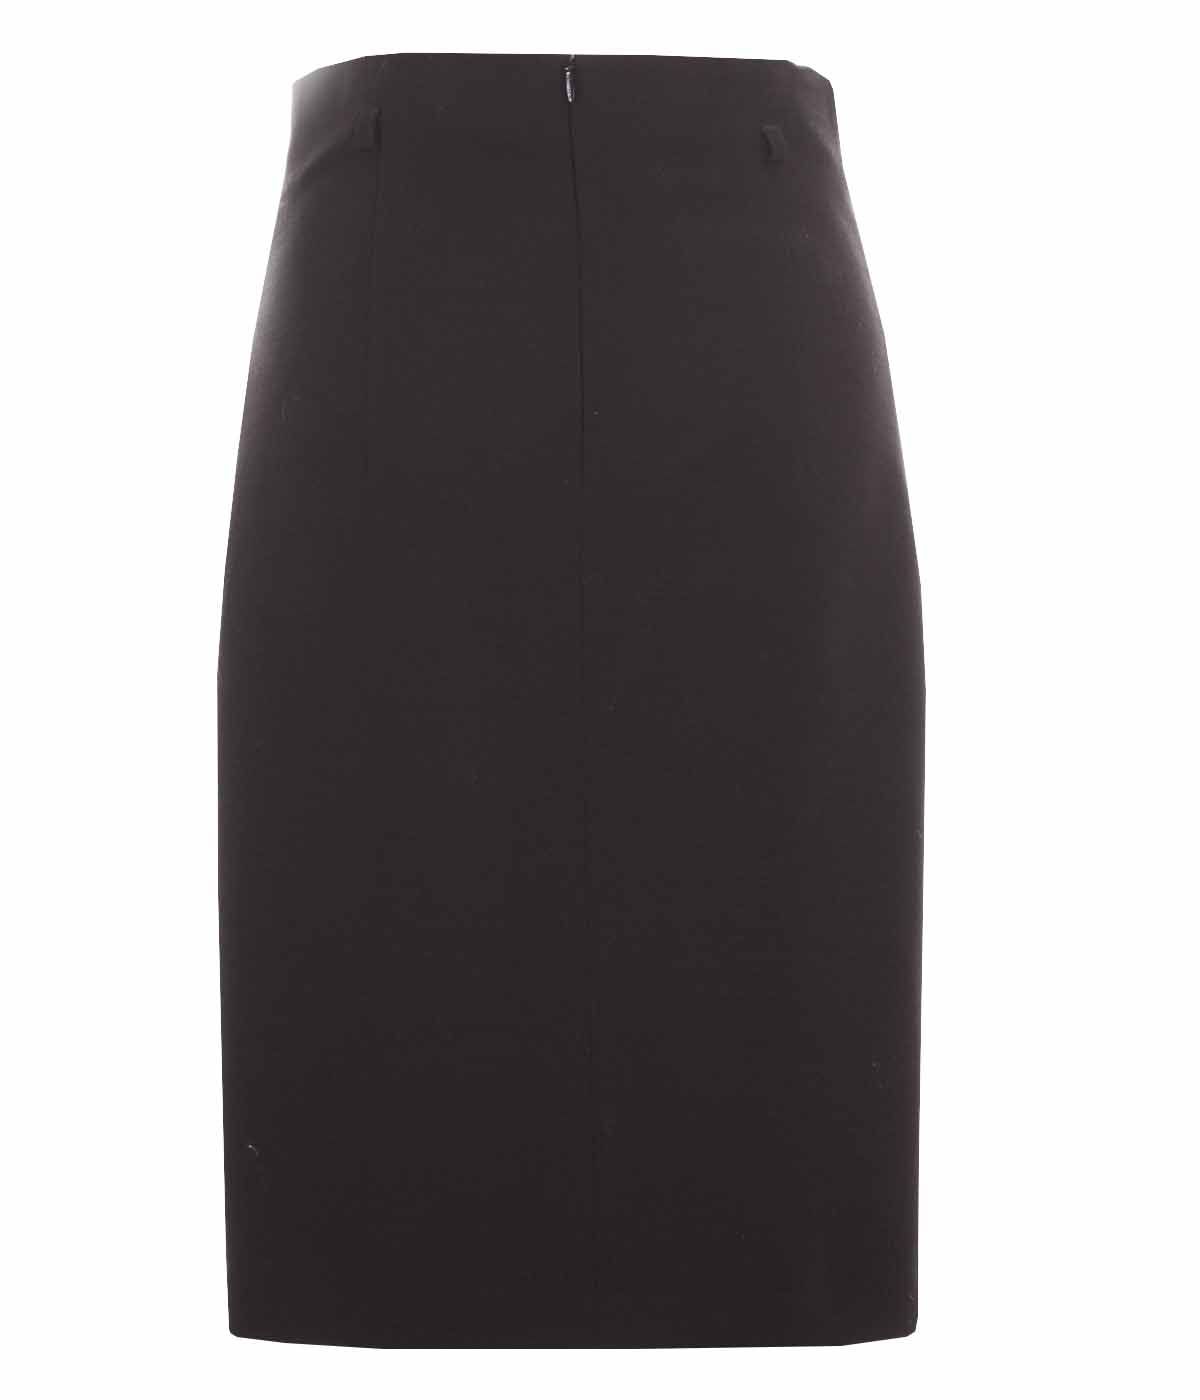 Pencil skirt with front slit, with rayon, wool and viscose 1